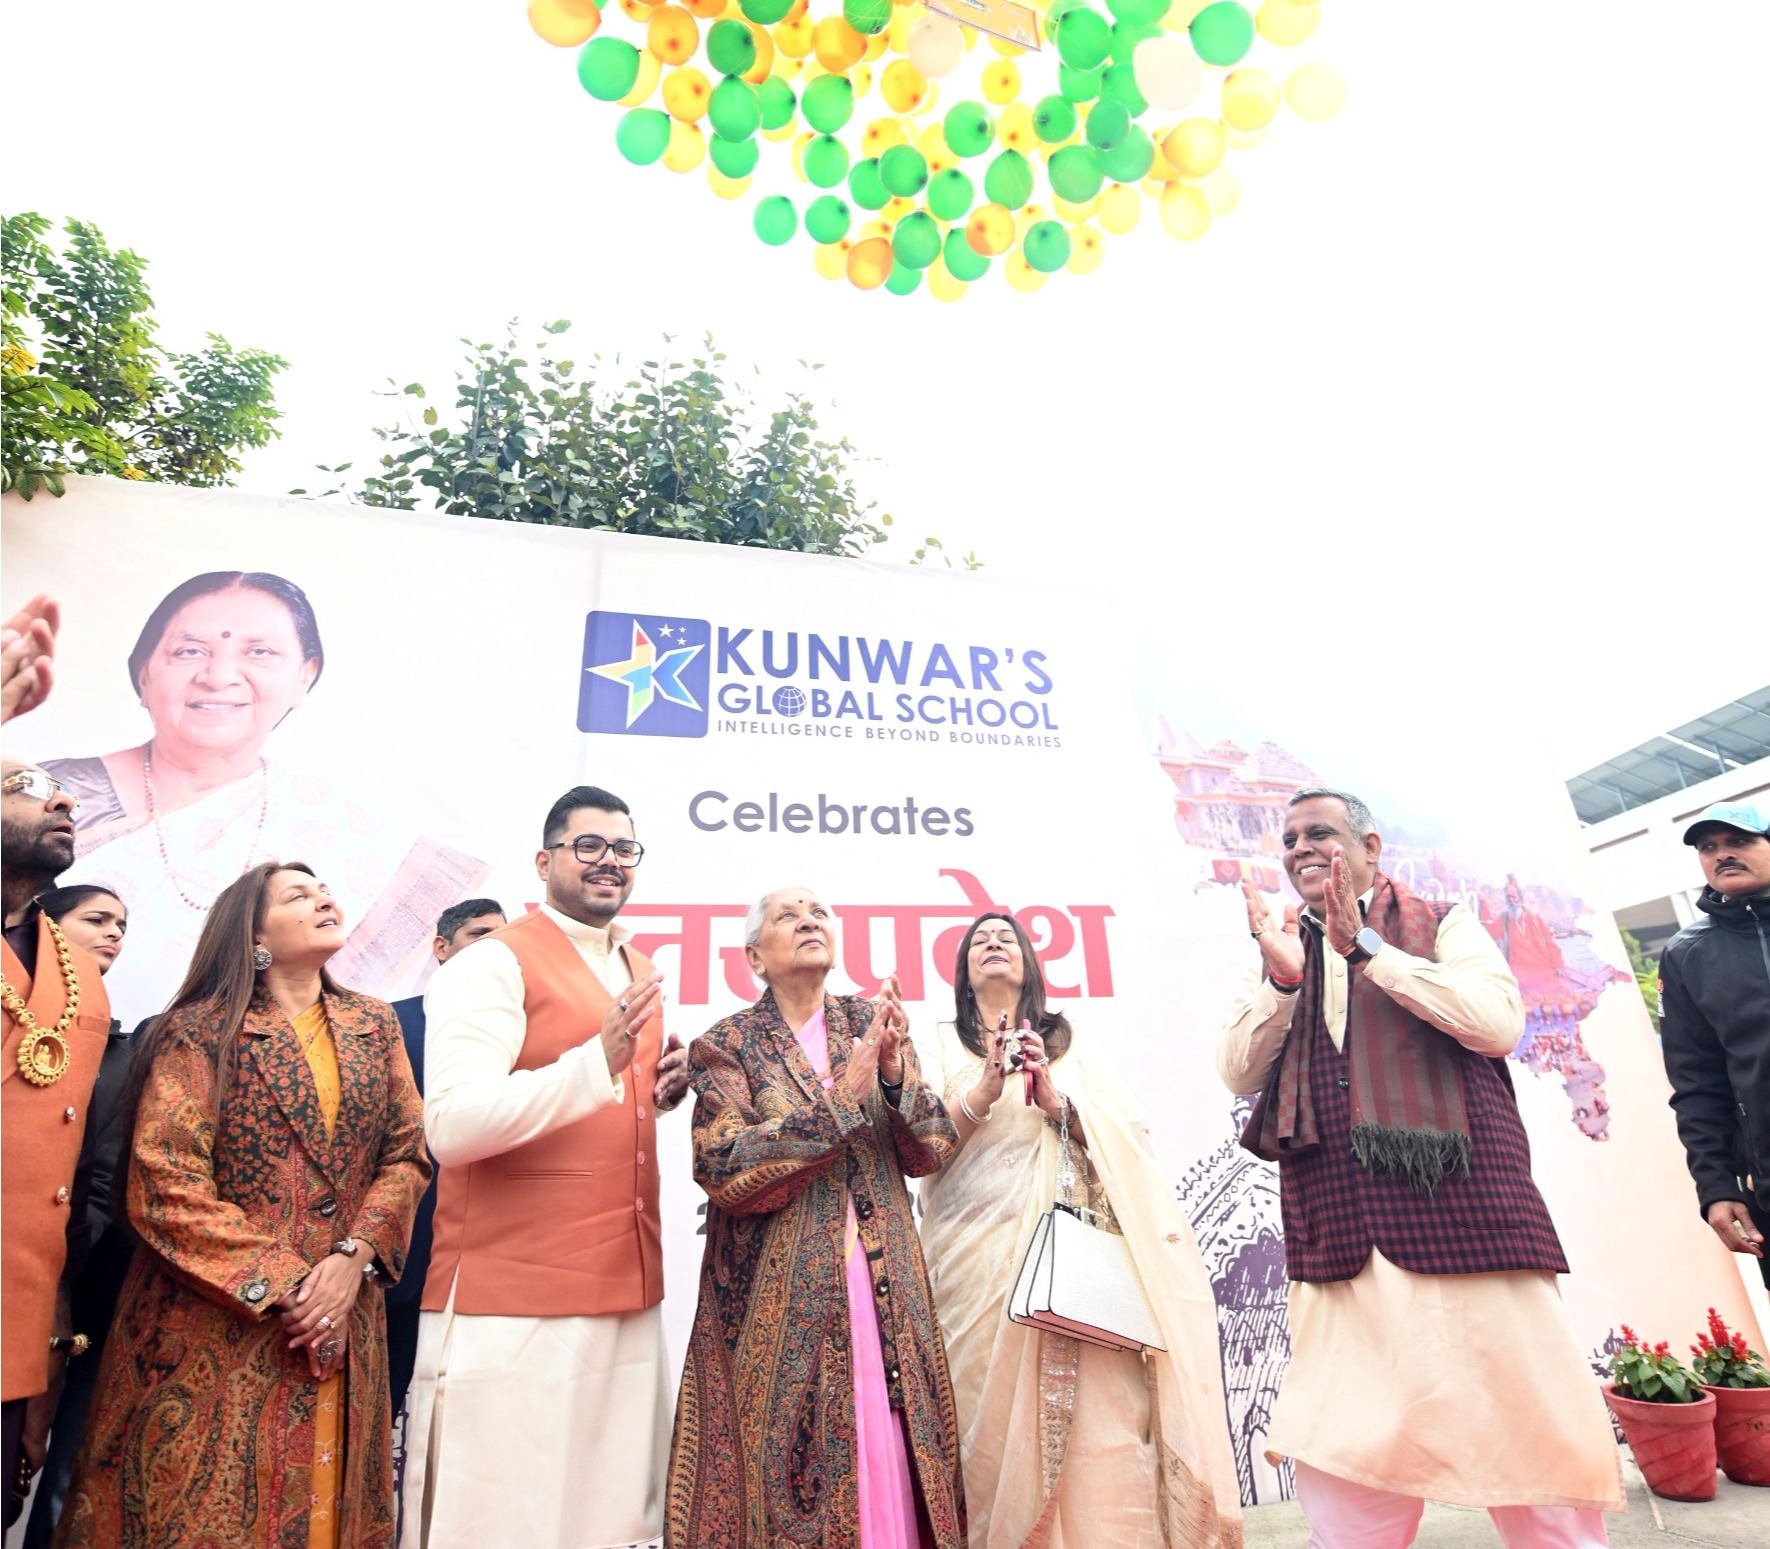 Governor attended the annual function of Kunwar Global School, Lucknow